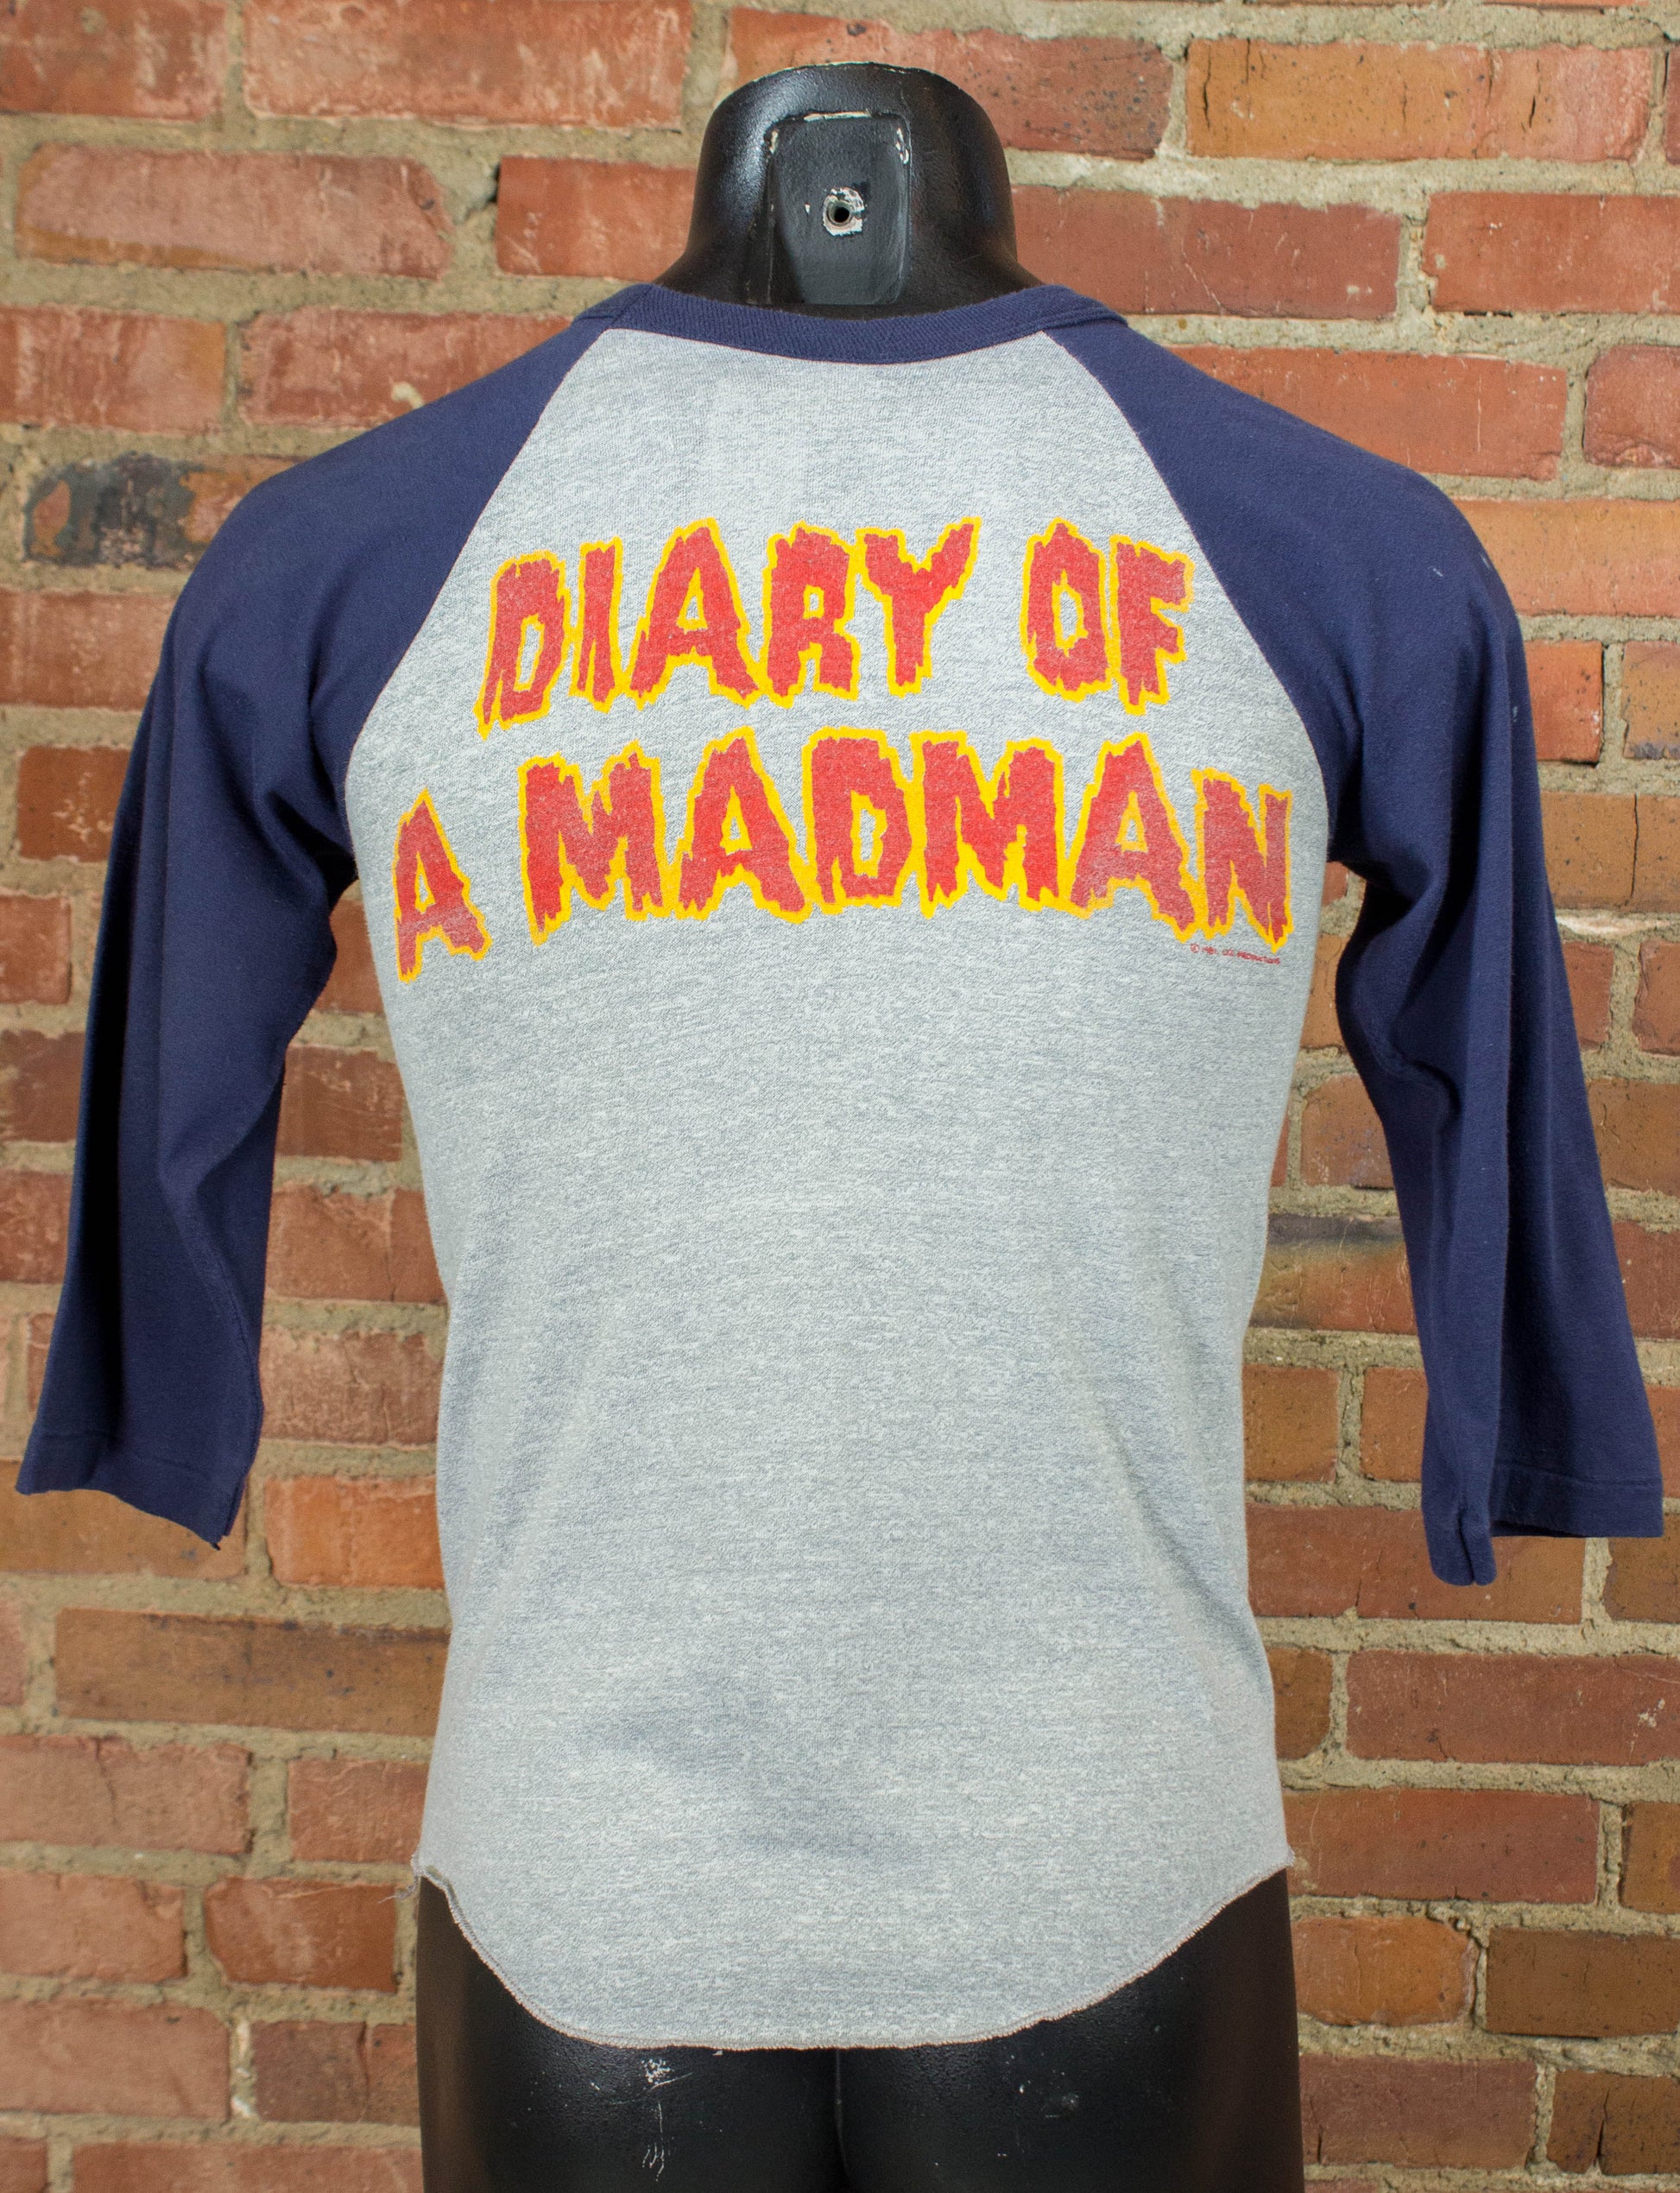 Vintage Ozzy Osbourne Concert T Shirt 1982 Diary of a Madman Grey and Navy Blue Raglan Jersey Small